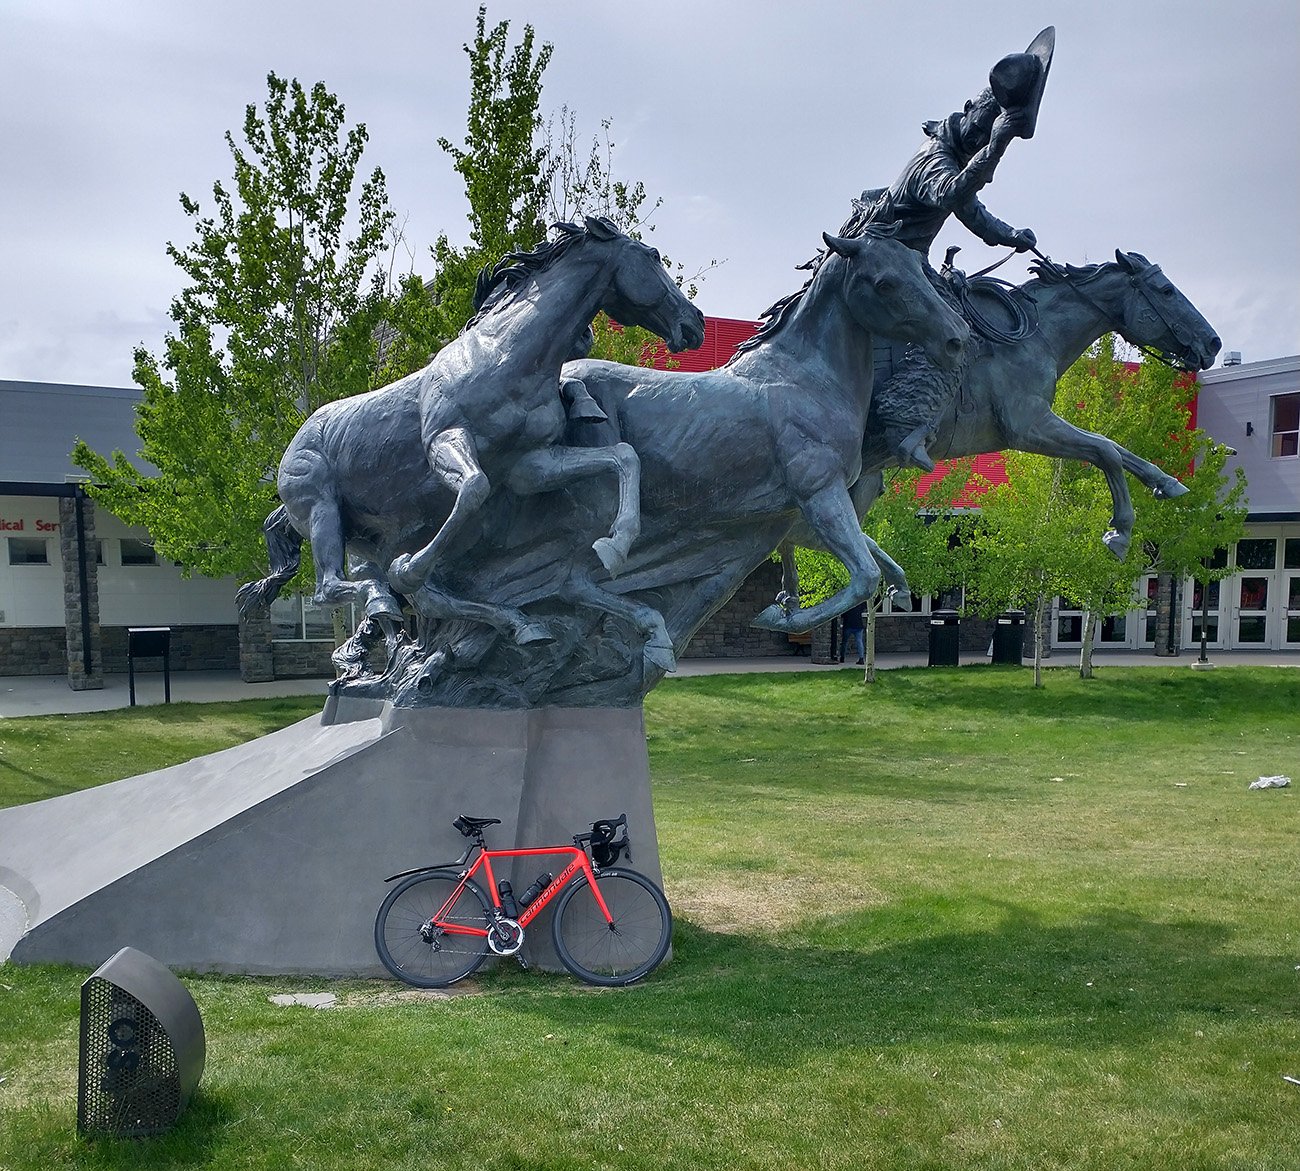 Part of a huge lifesize statue called "The Calgary Stampede" near the stadium downtown.